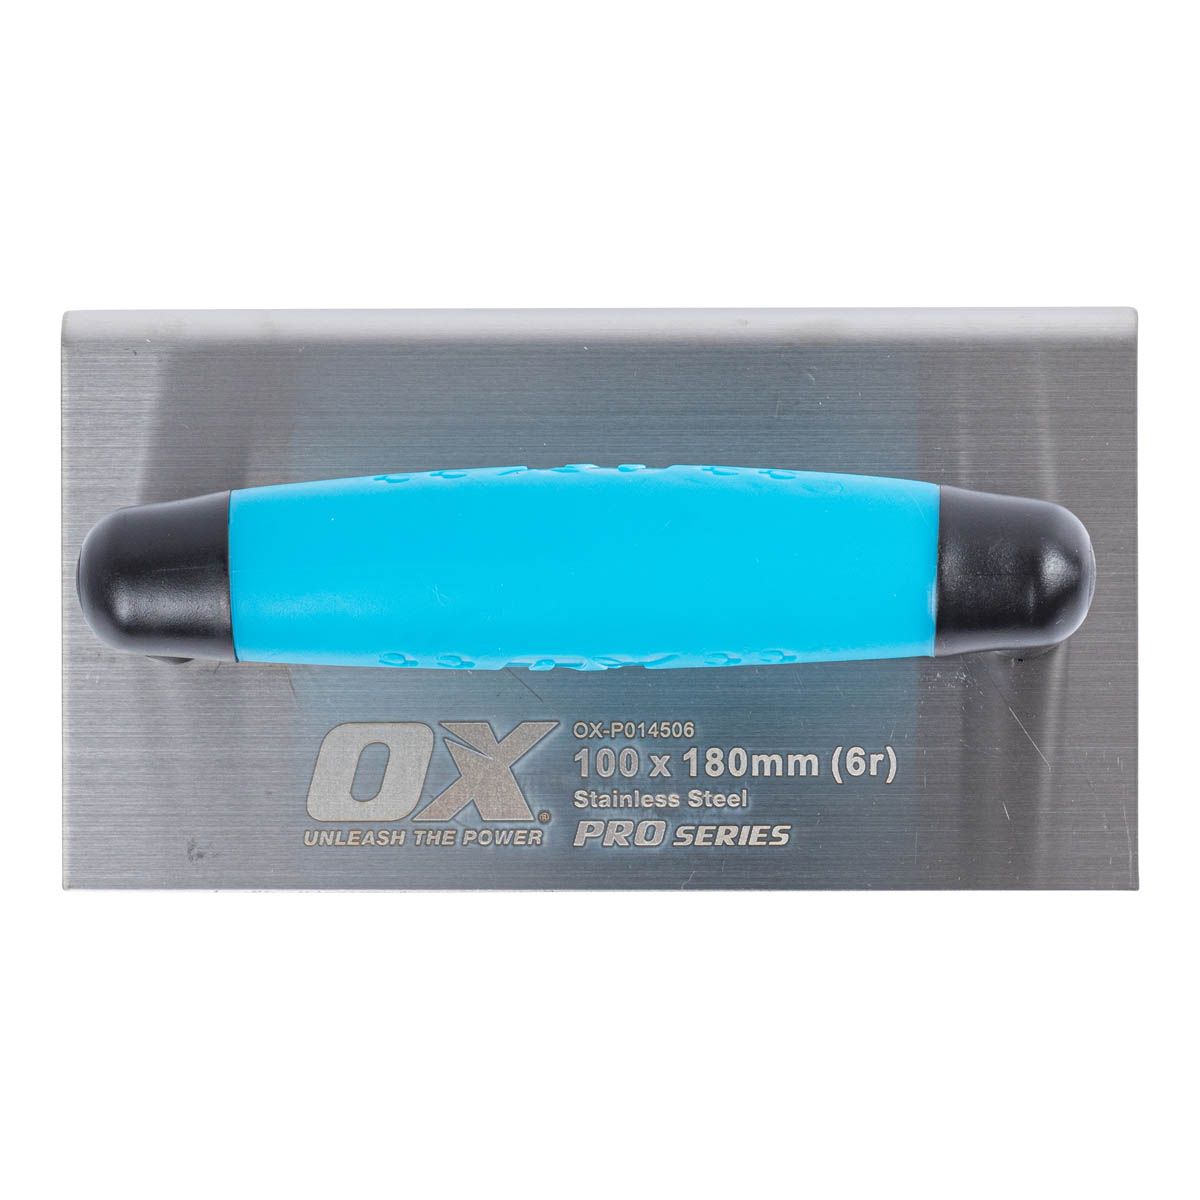 Stainless Steel Medium Edger by Ox